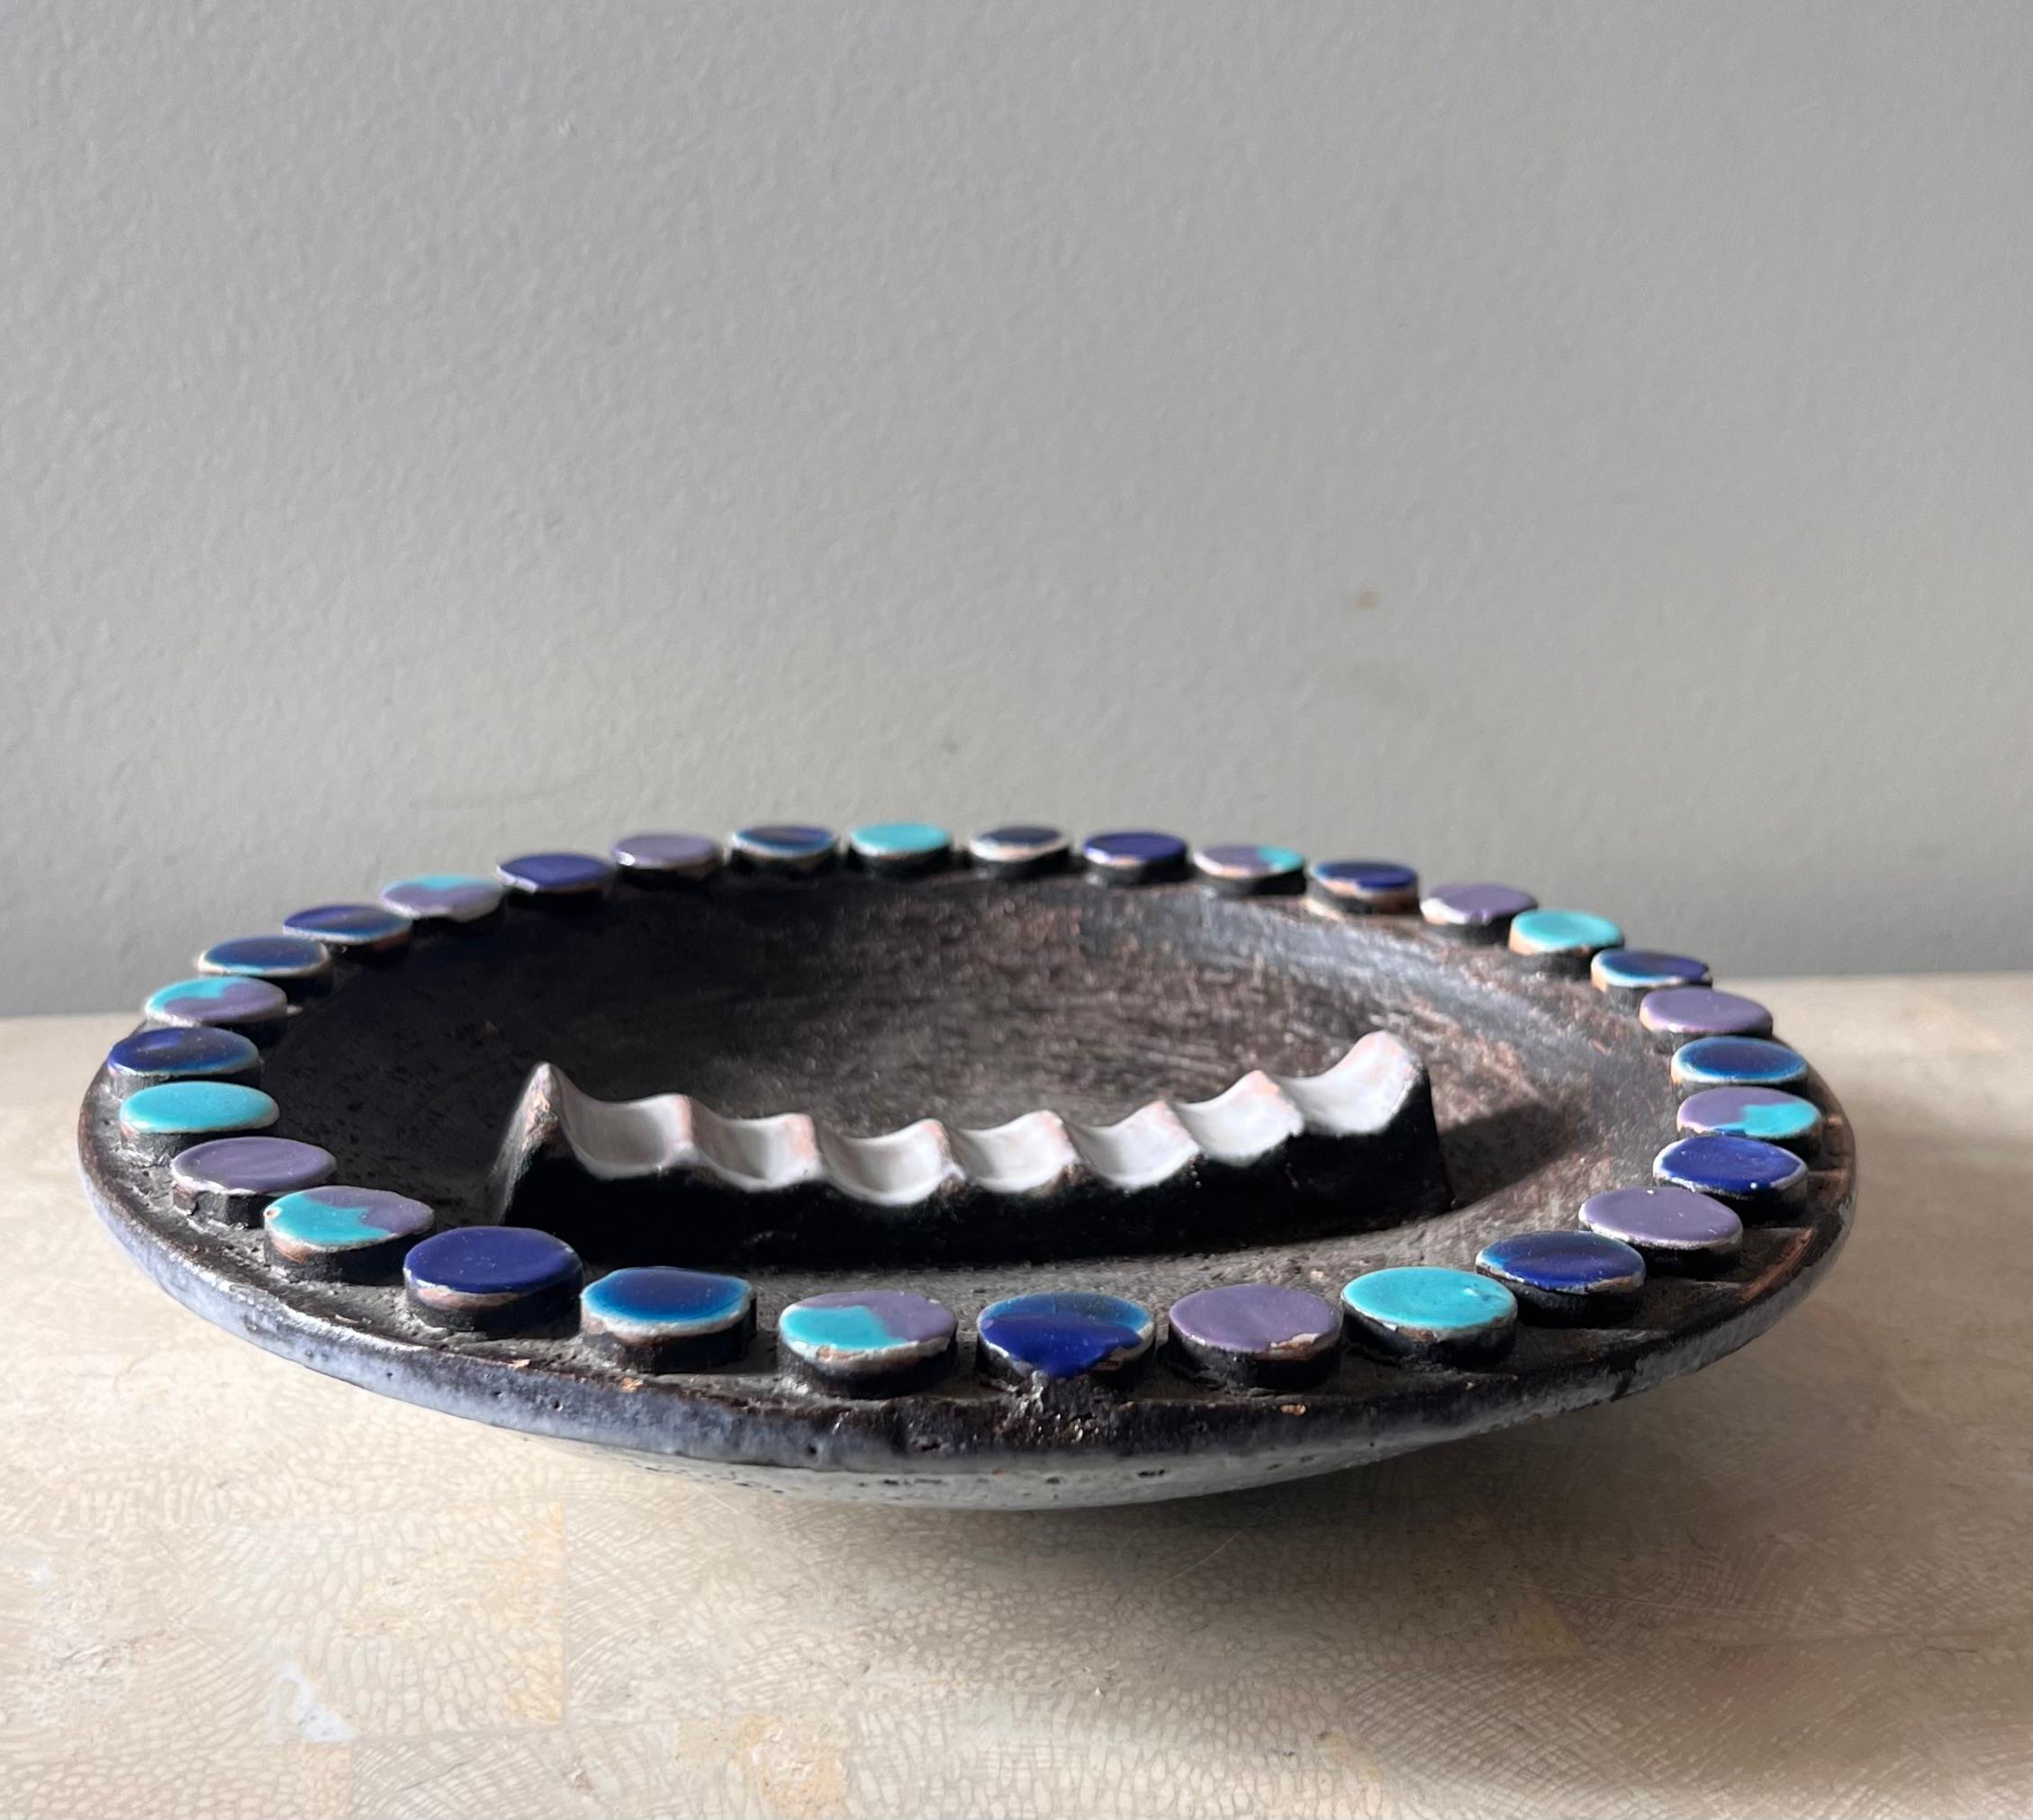 A monumental mid century modern ceramic ashtray by Aldo Londi for Bitossi, Italy circa 1960s. Tones of pewter, turquoise, lavender, and Yves Klein blue, and featuring 7 rivulets in center. Some wear to the colored tiles adorning the edge, but